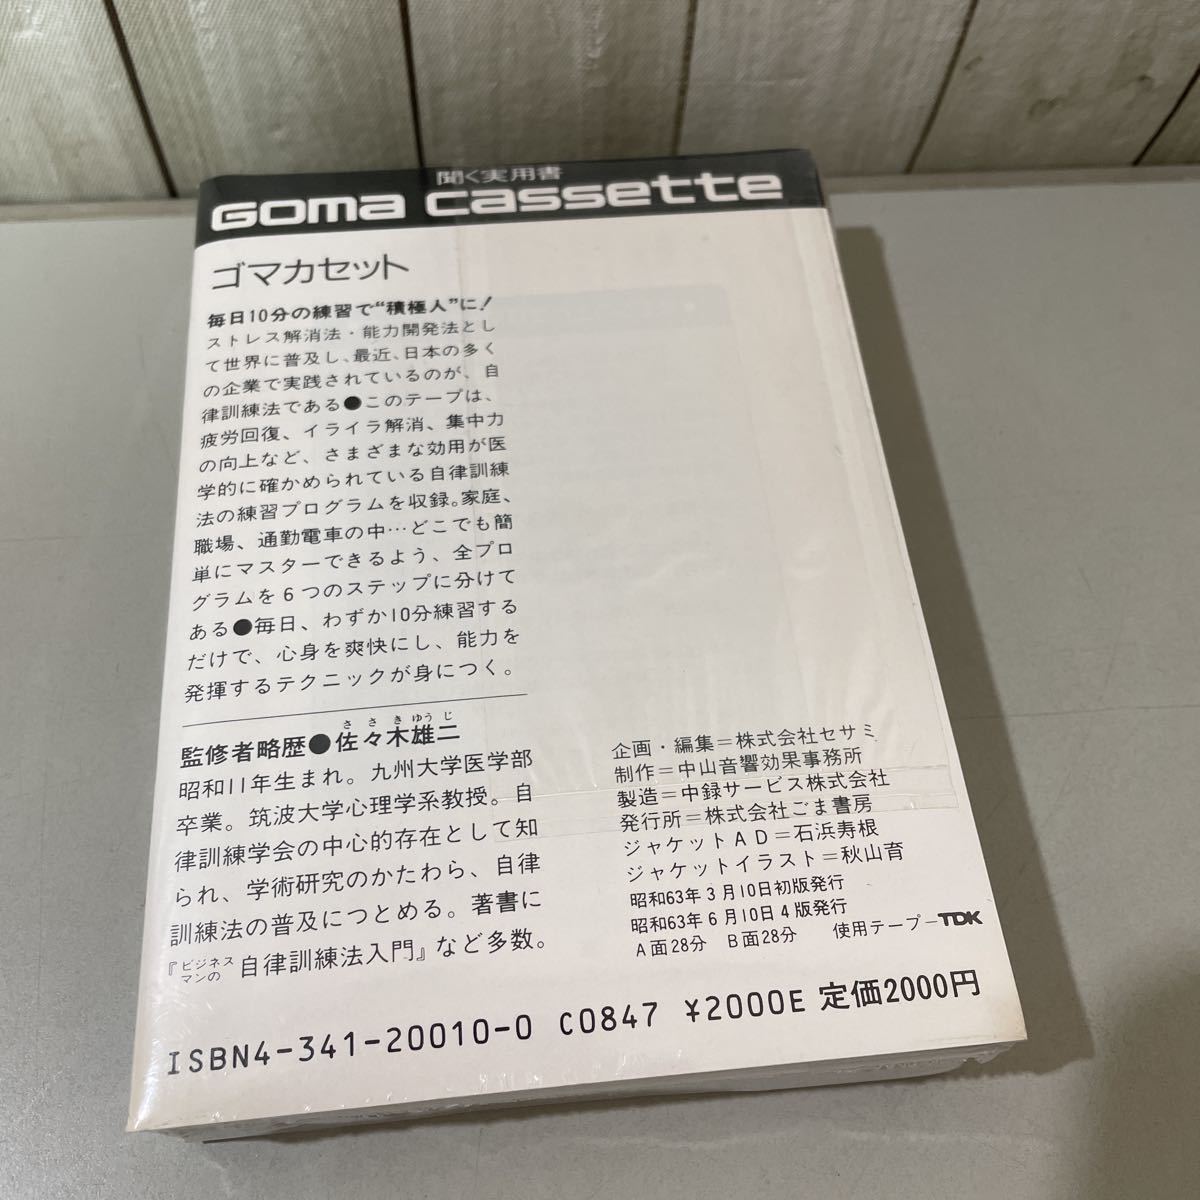  unopened! hard-to-find * rubber cassette tape heart . strongly make self law training law introduction Sasaki male two /6 step . easily master / listen practical use paper / sesame bookstore *A2272-2